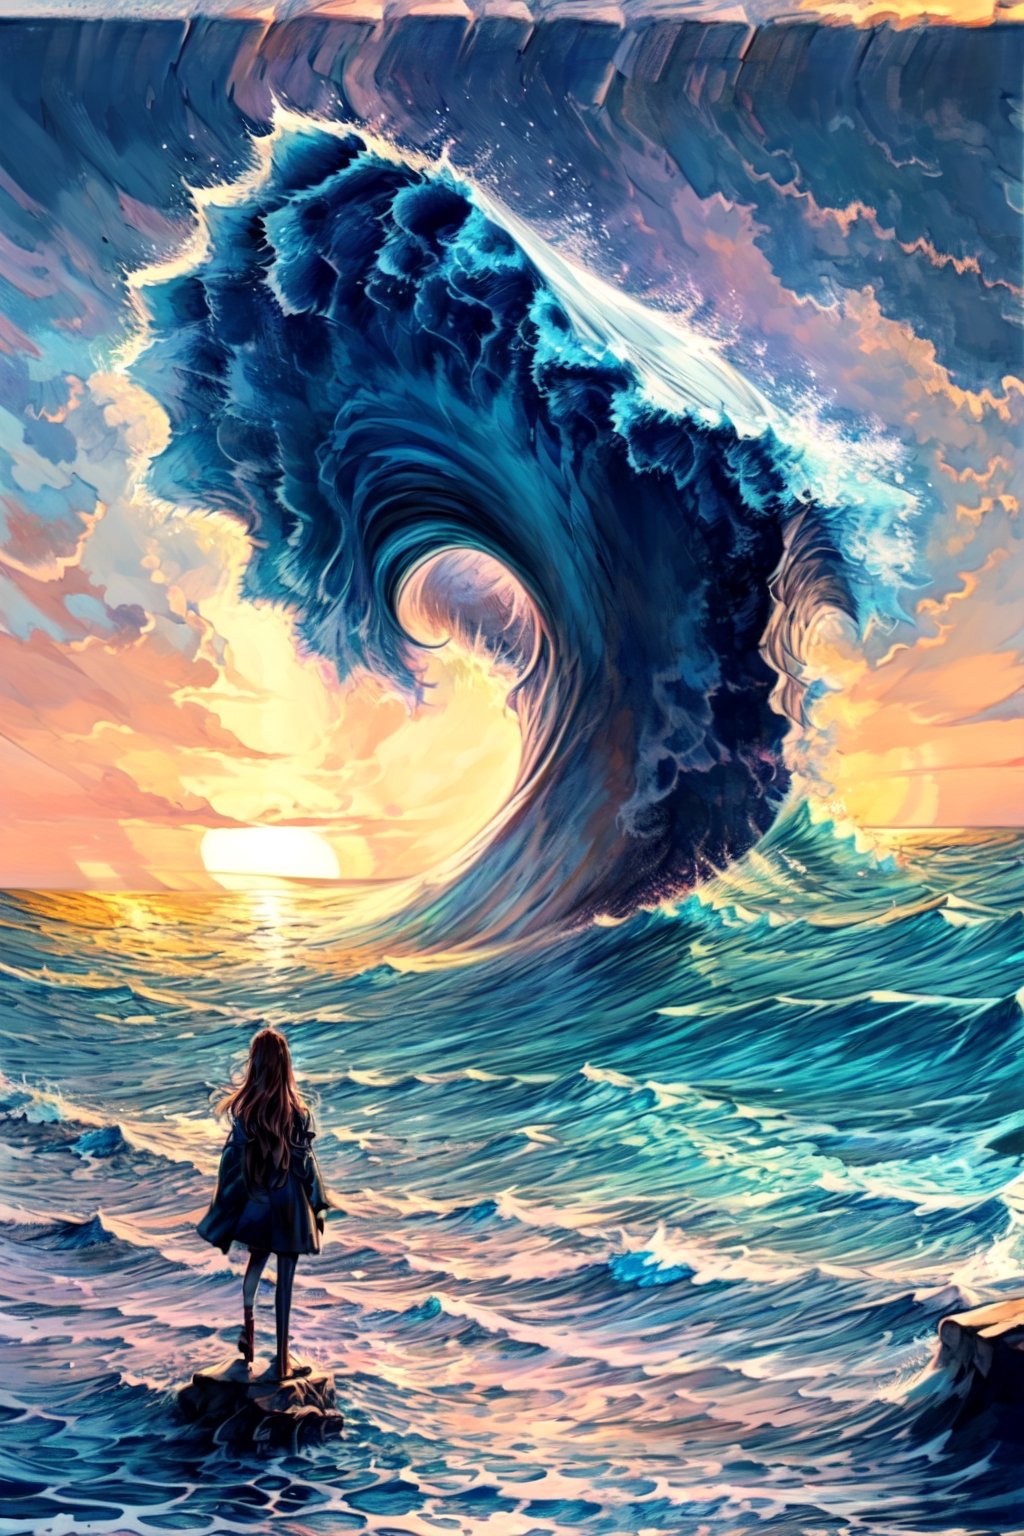 a girl raised her hand to shade her eyes from the sun, standing on a rocky cliff overlooking a turbulent sea, waves crashing against the shore below, storm clouds gathering in the distance, a sense of impending danger and excitement in the dramatic landscape, captured in a dynamic and atmospheric sculpture style with exaggerated proportions and textures,oil painting,3g3Kl0st3rXL,no_humans,EpicArt